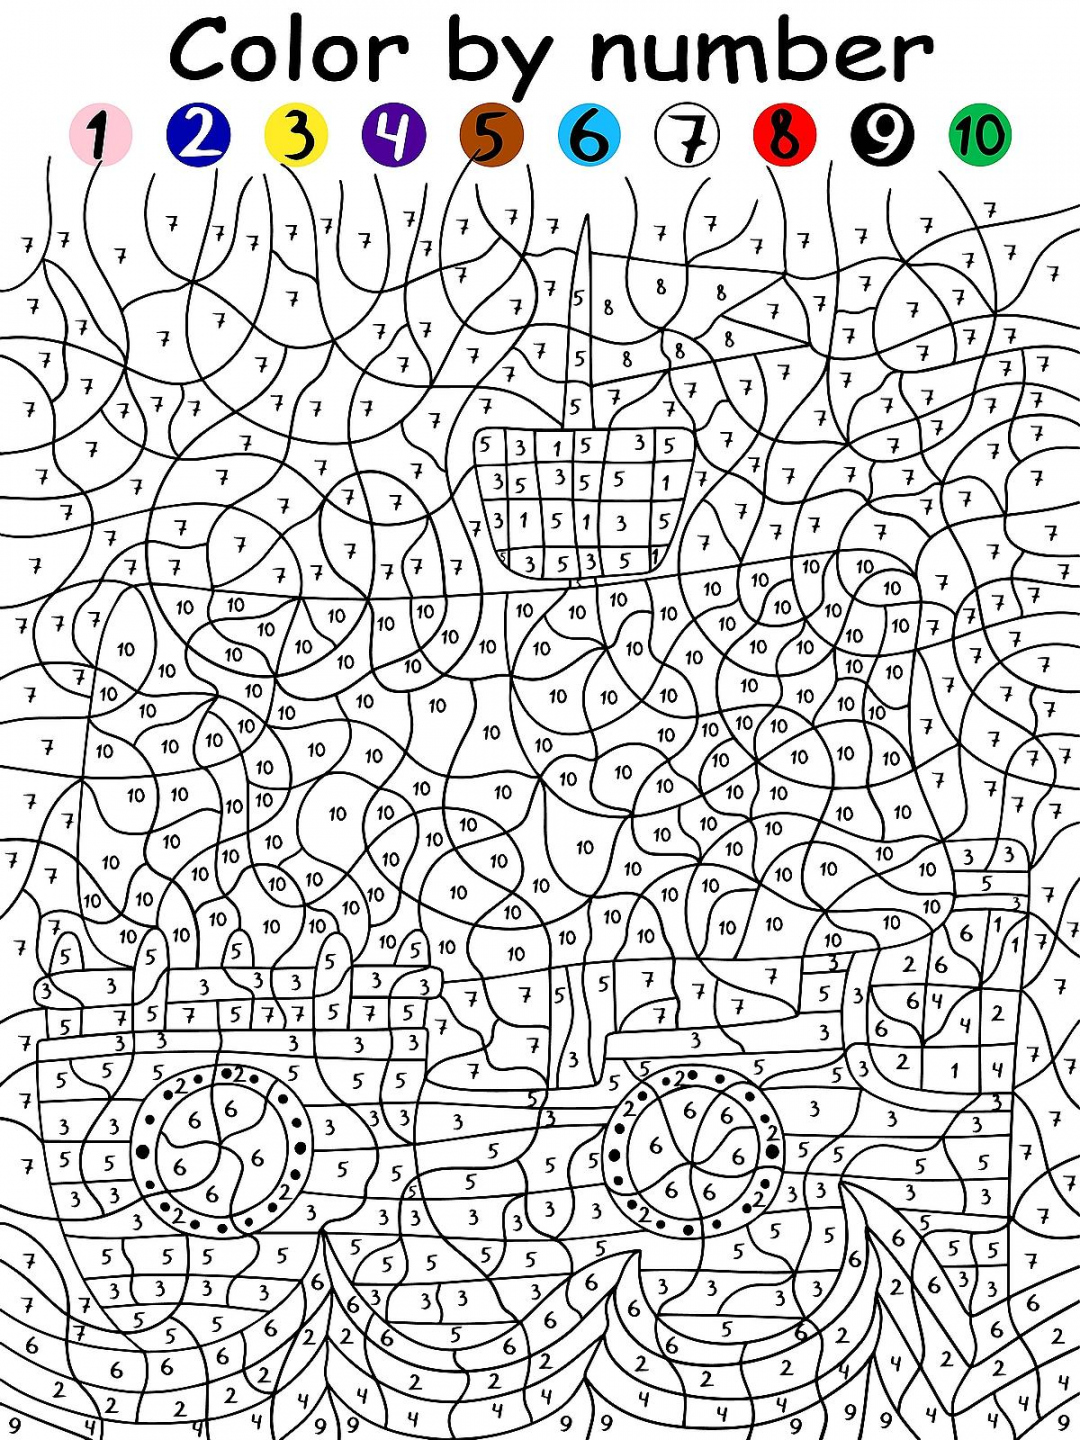 Free Printable Color By Number For Adults - Printable - Color By Numbers Activity Pages for Kids: Free & Fun Coloring